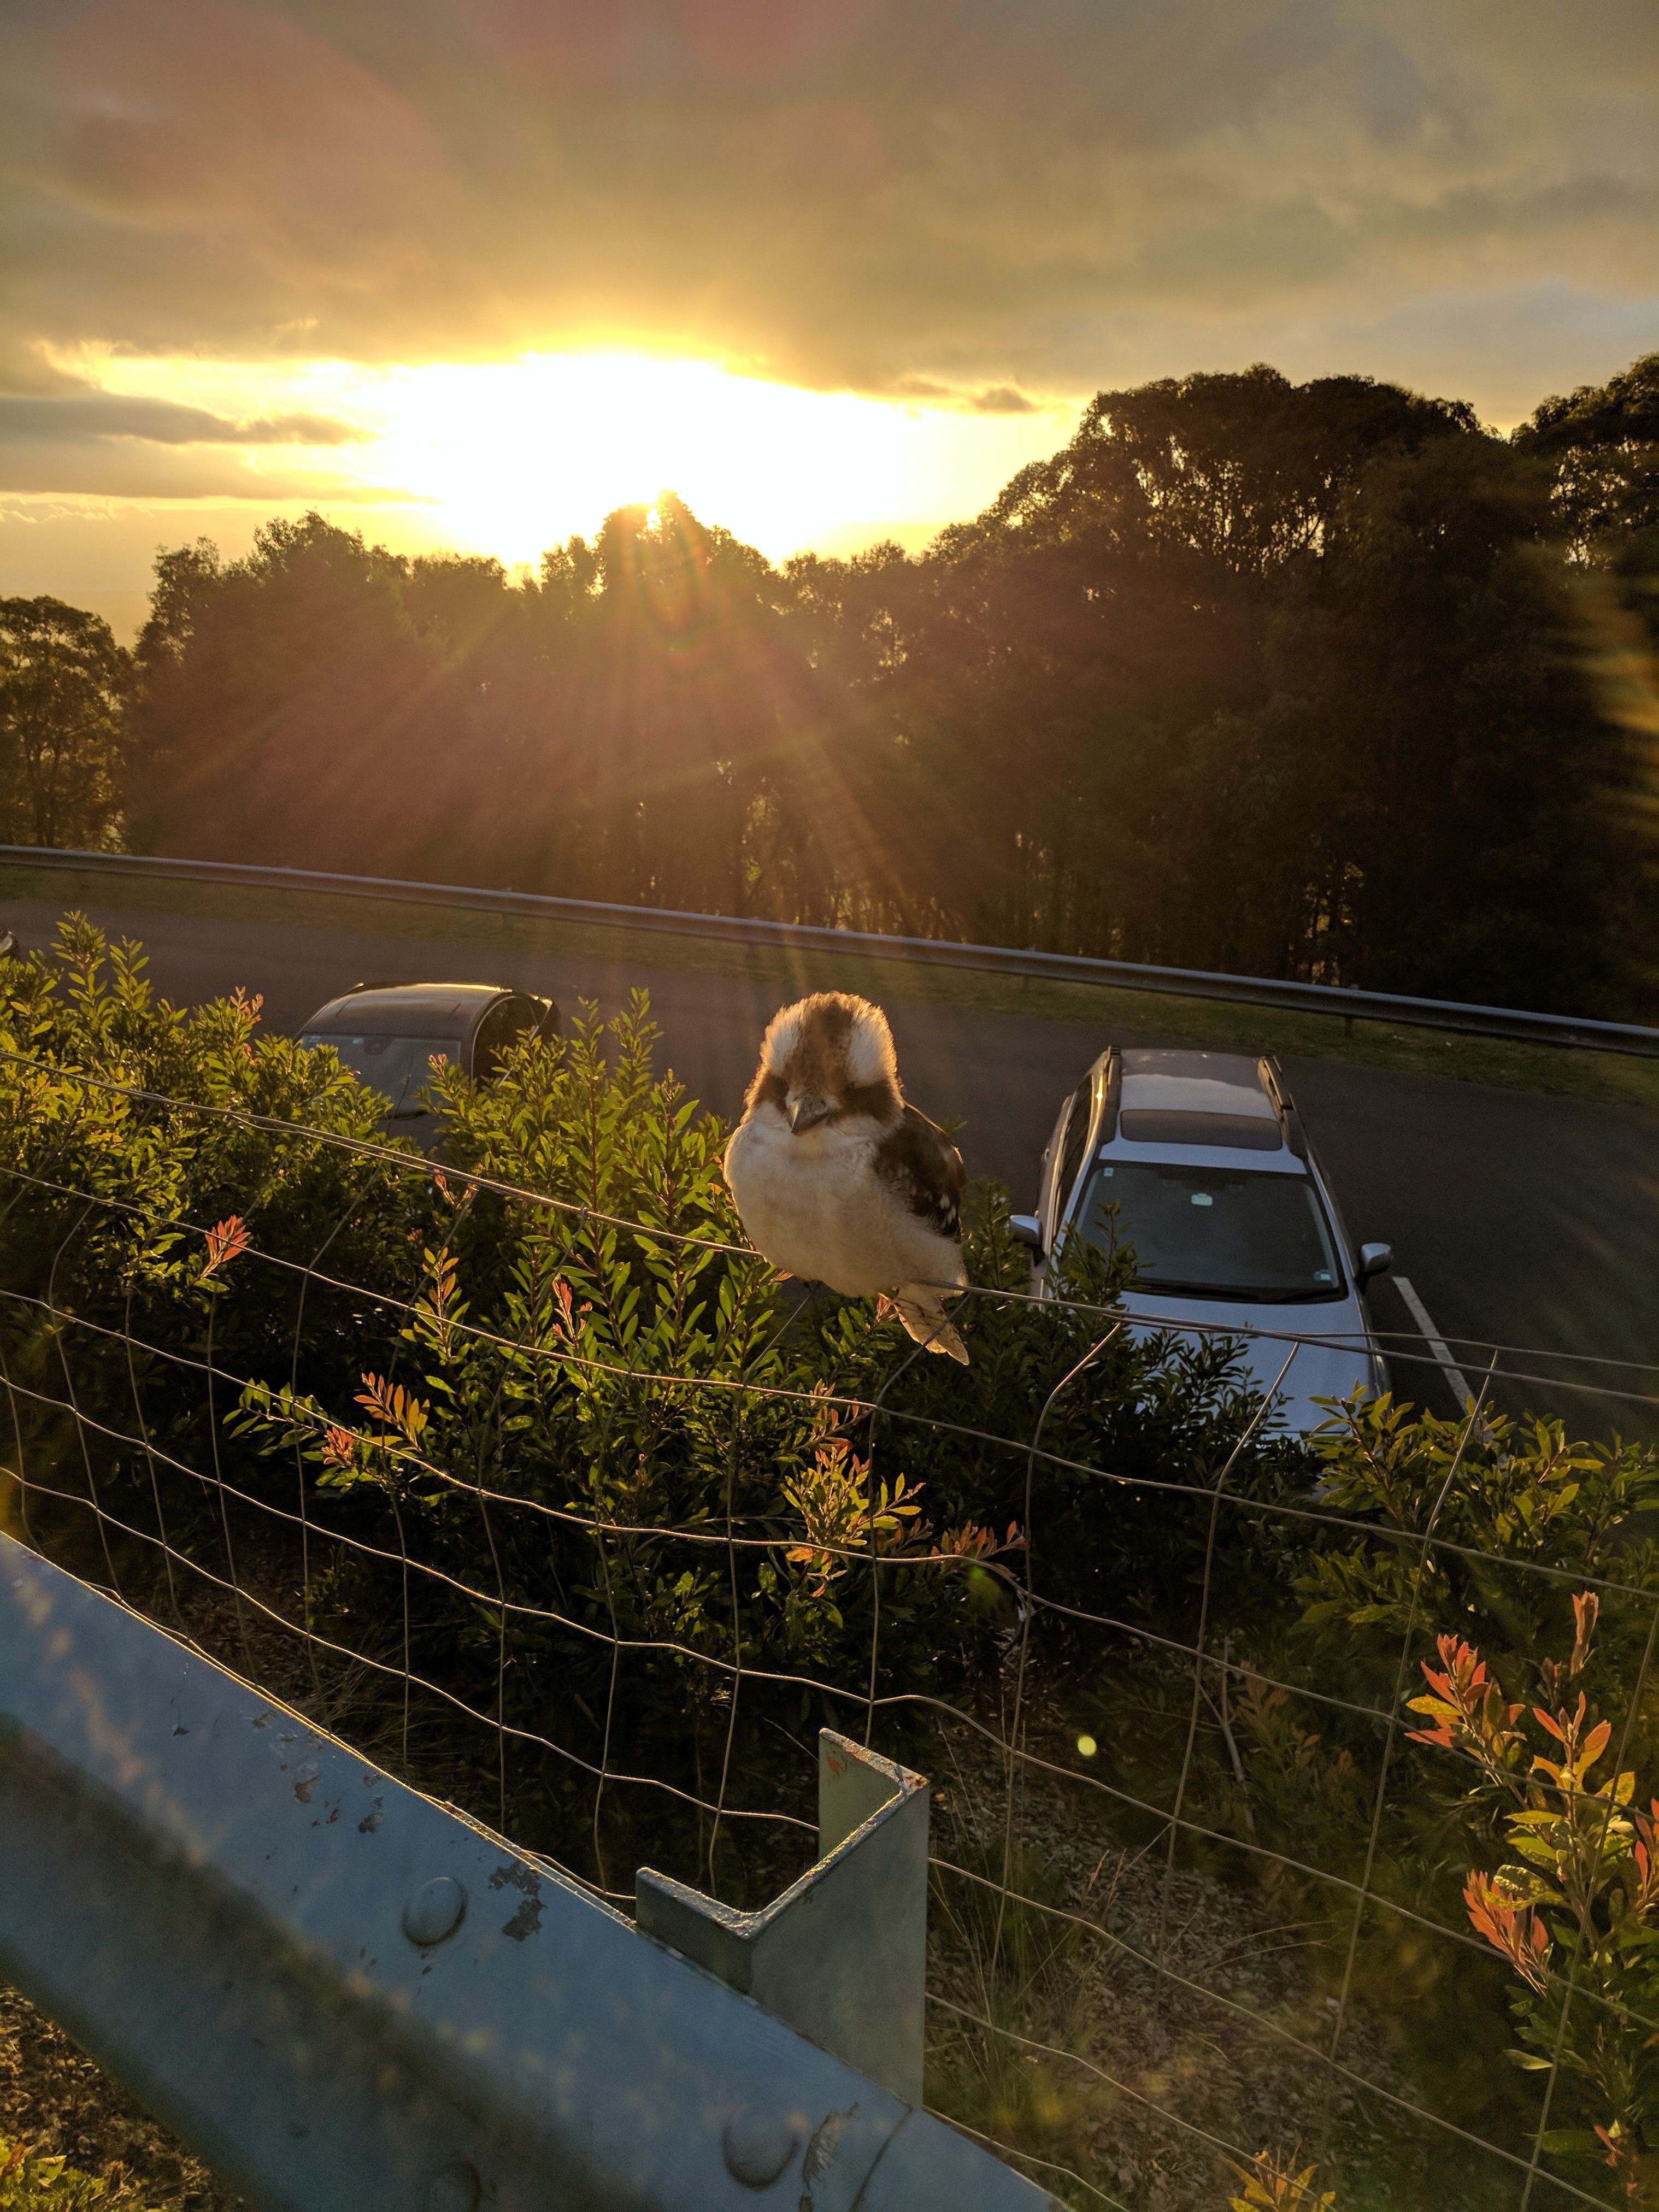 Caption: A Kookaburra sitting on fence with sunset in background